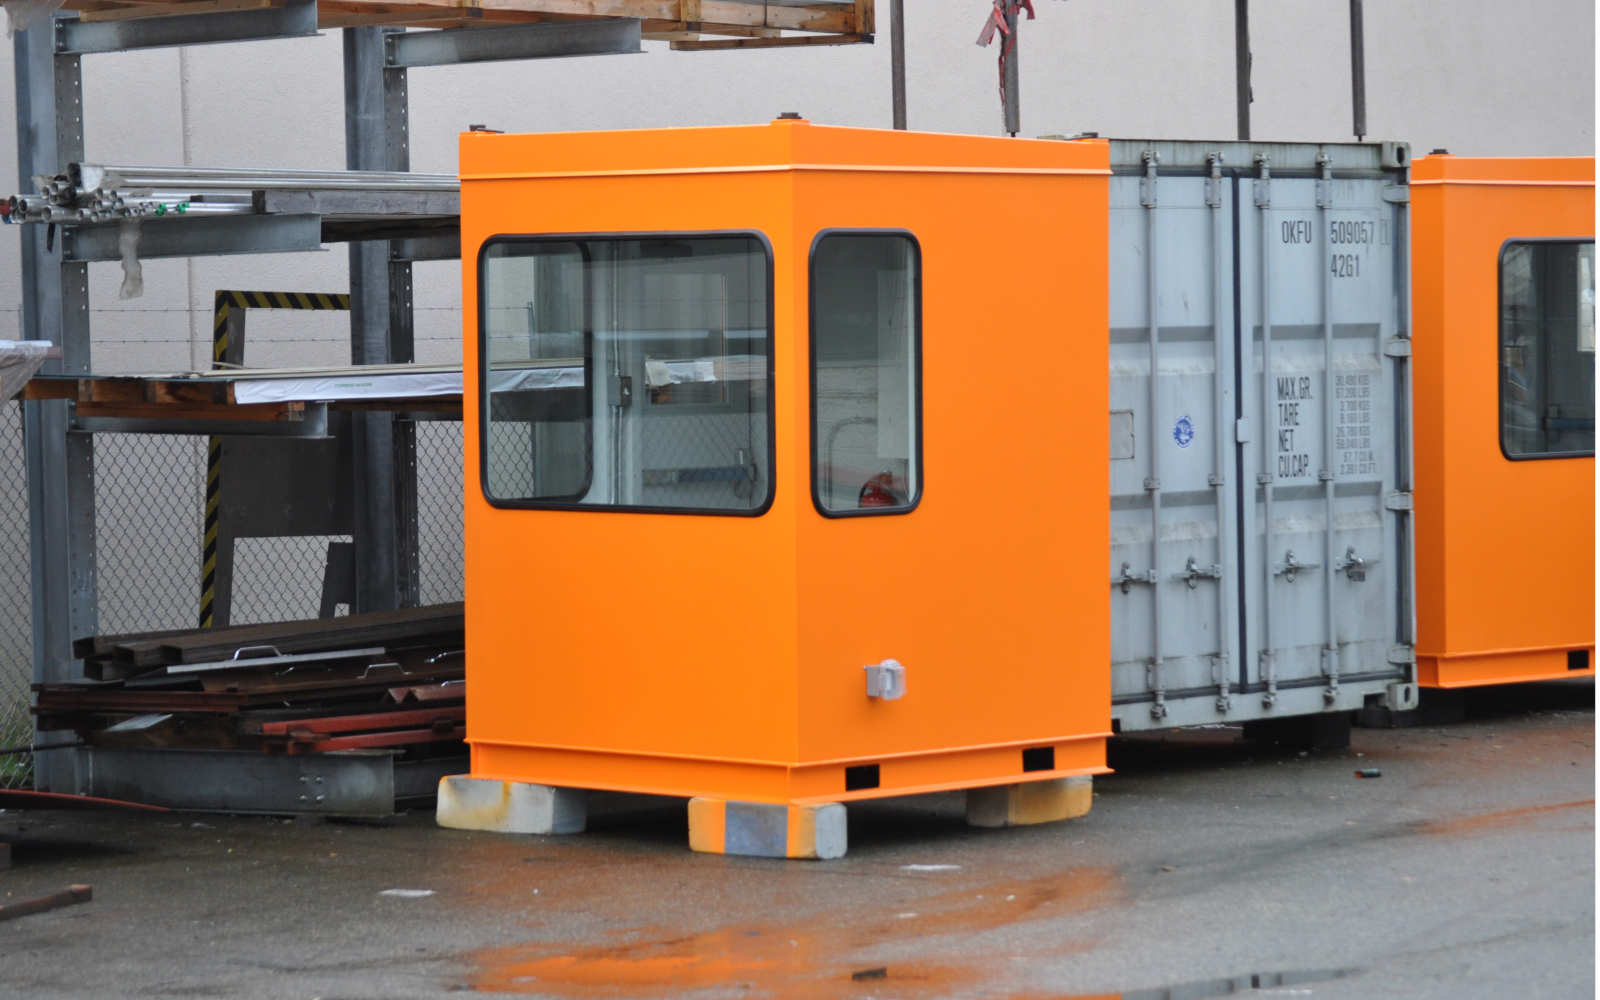 Pre-Fabricated, Op Cab, Operators Cab, Shatter Proof Glass, Operators Chair, Remote I/O, Sonic Enclosures